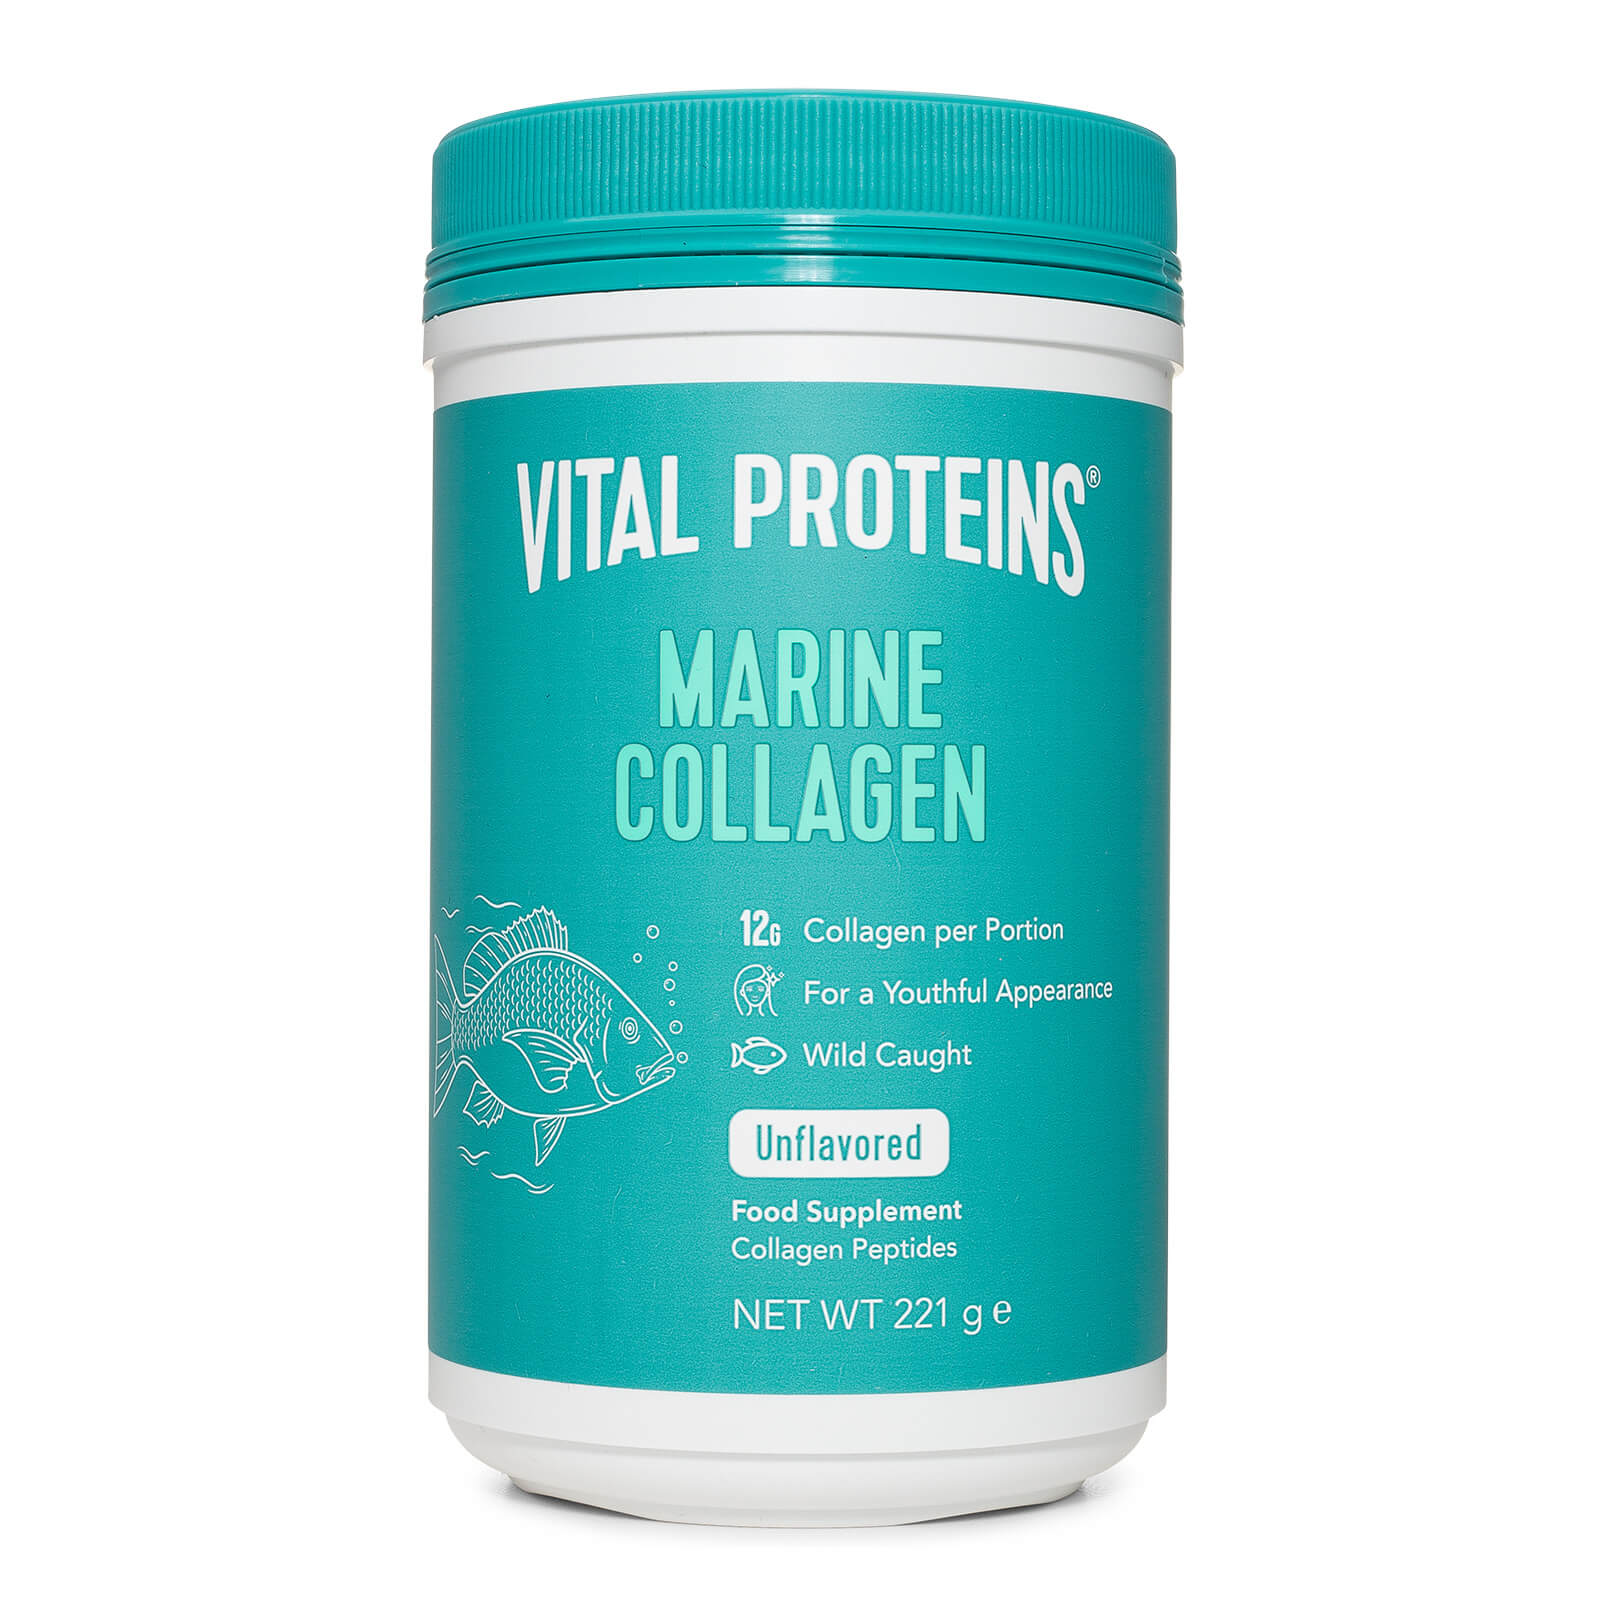 Marine Collagen - 7oz Subscription - Delivery Every 2 Months